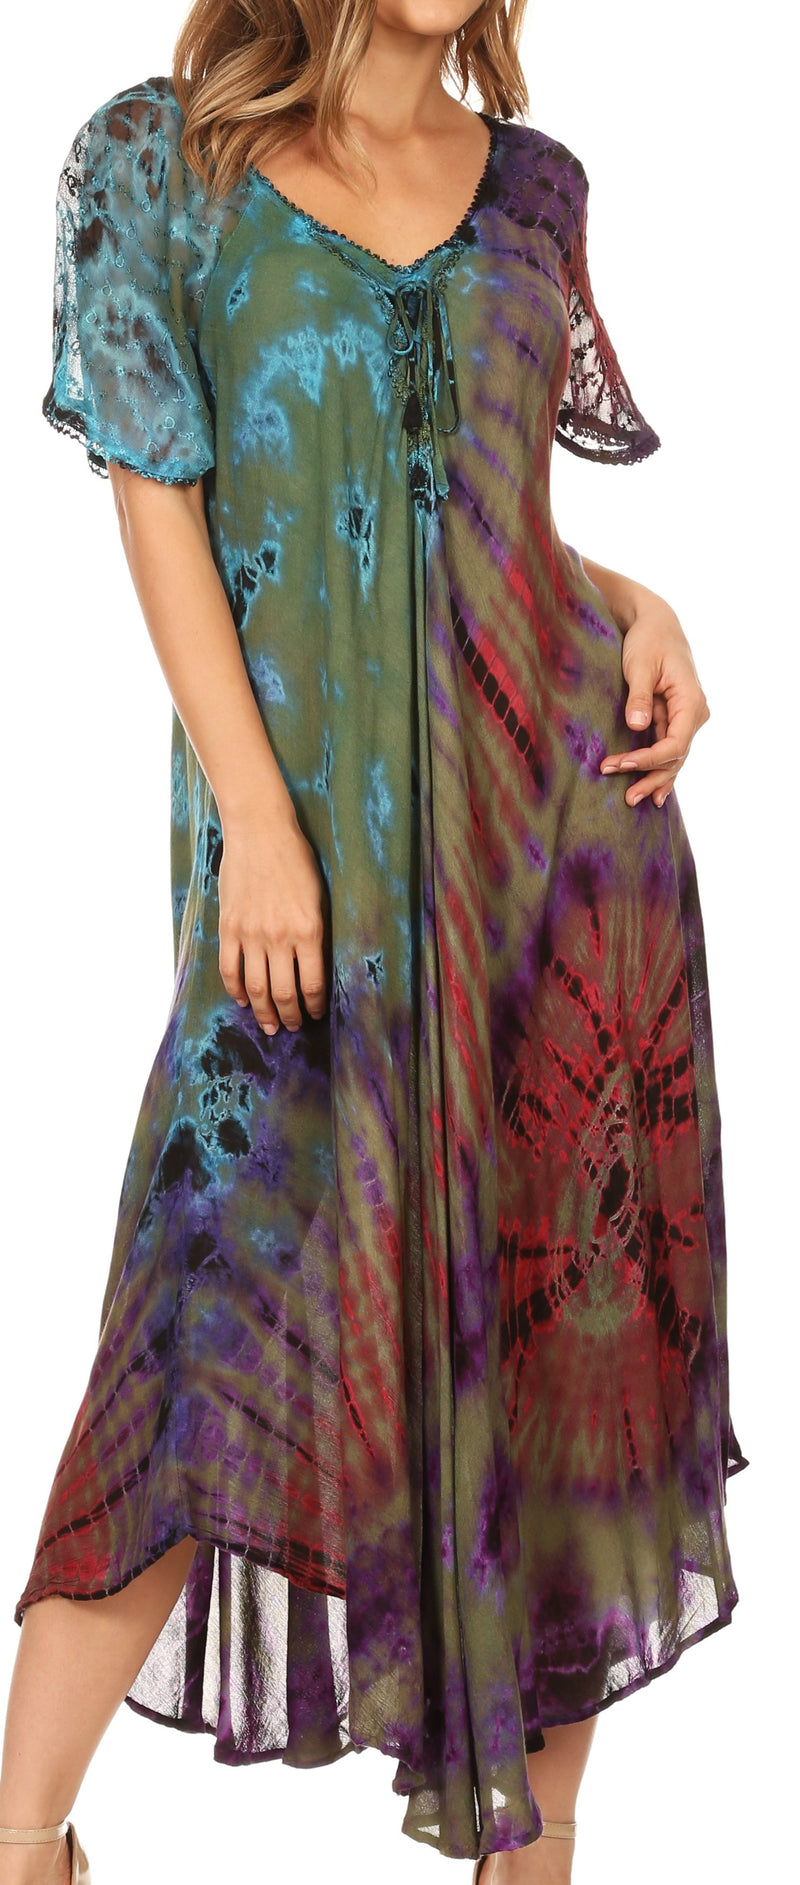 Sakkas Ria Tie Dye Embroidered Cap Sleeve Wide Neck Caftan Dress / Beach Cover Up